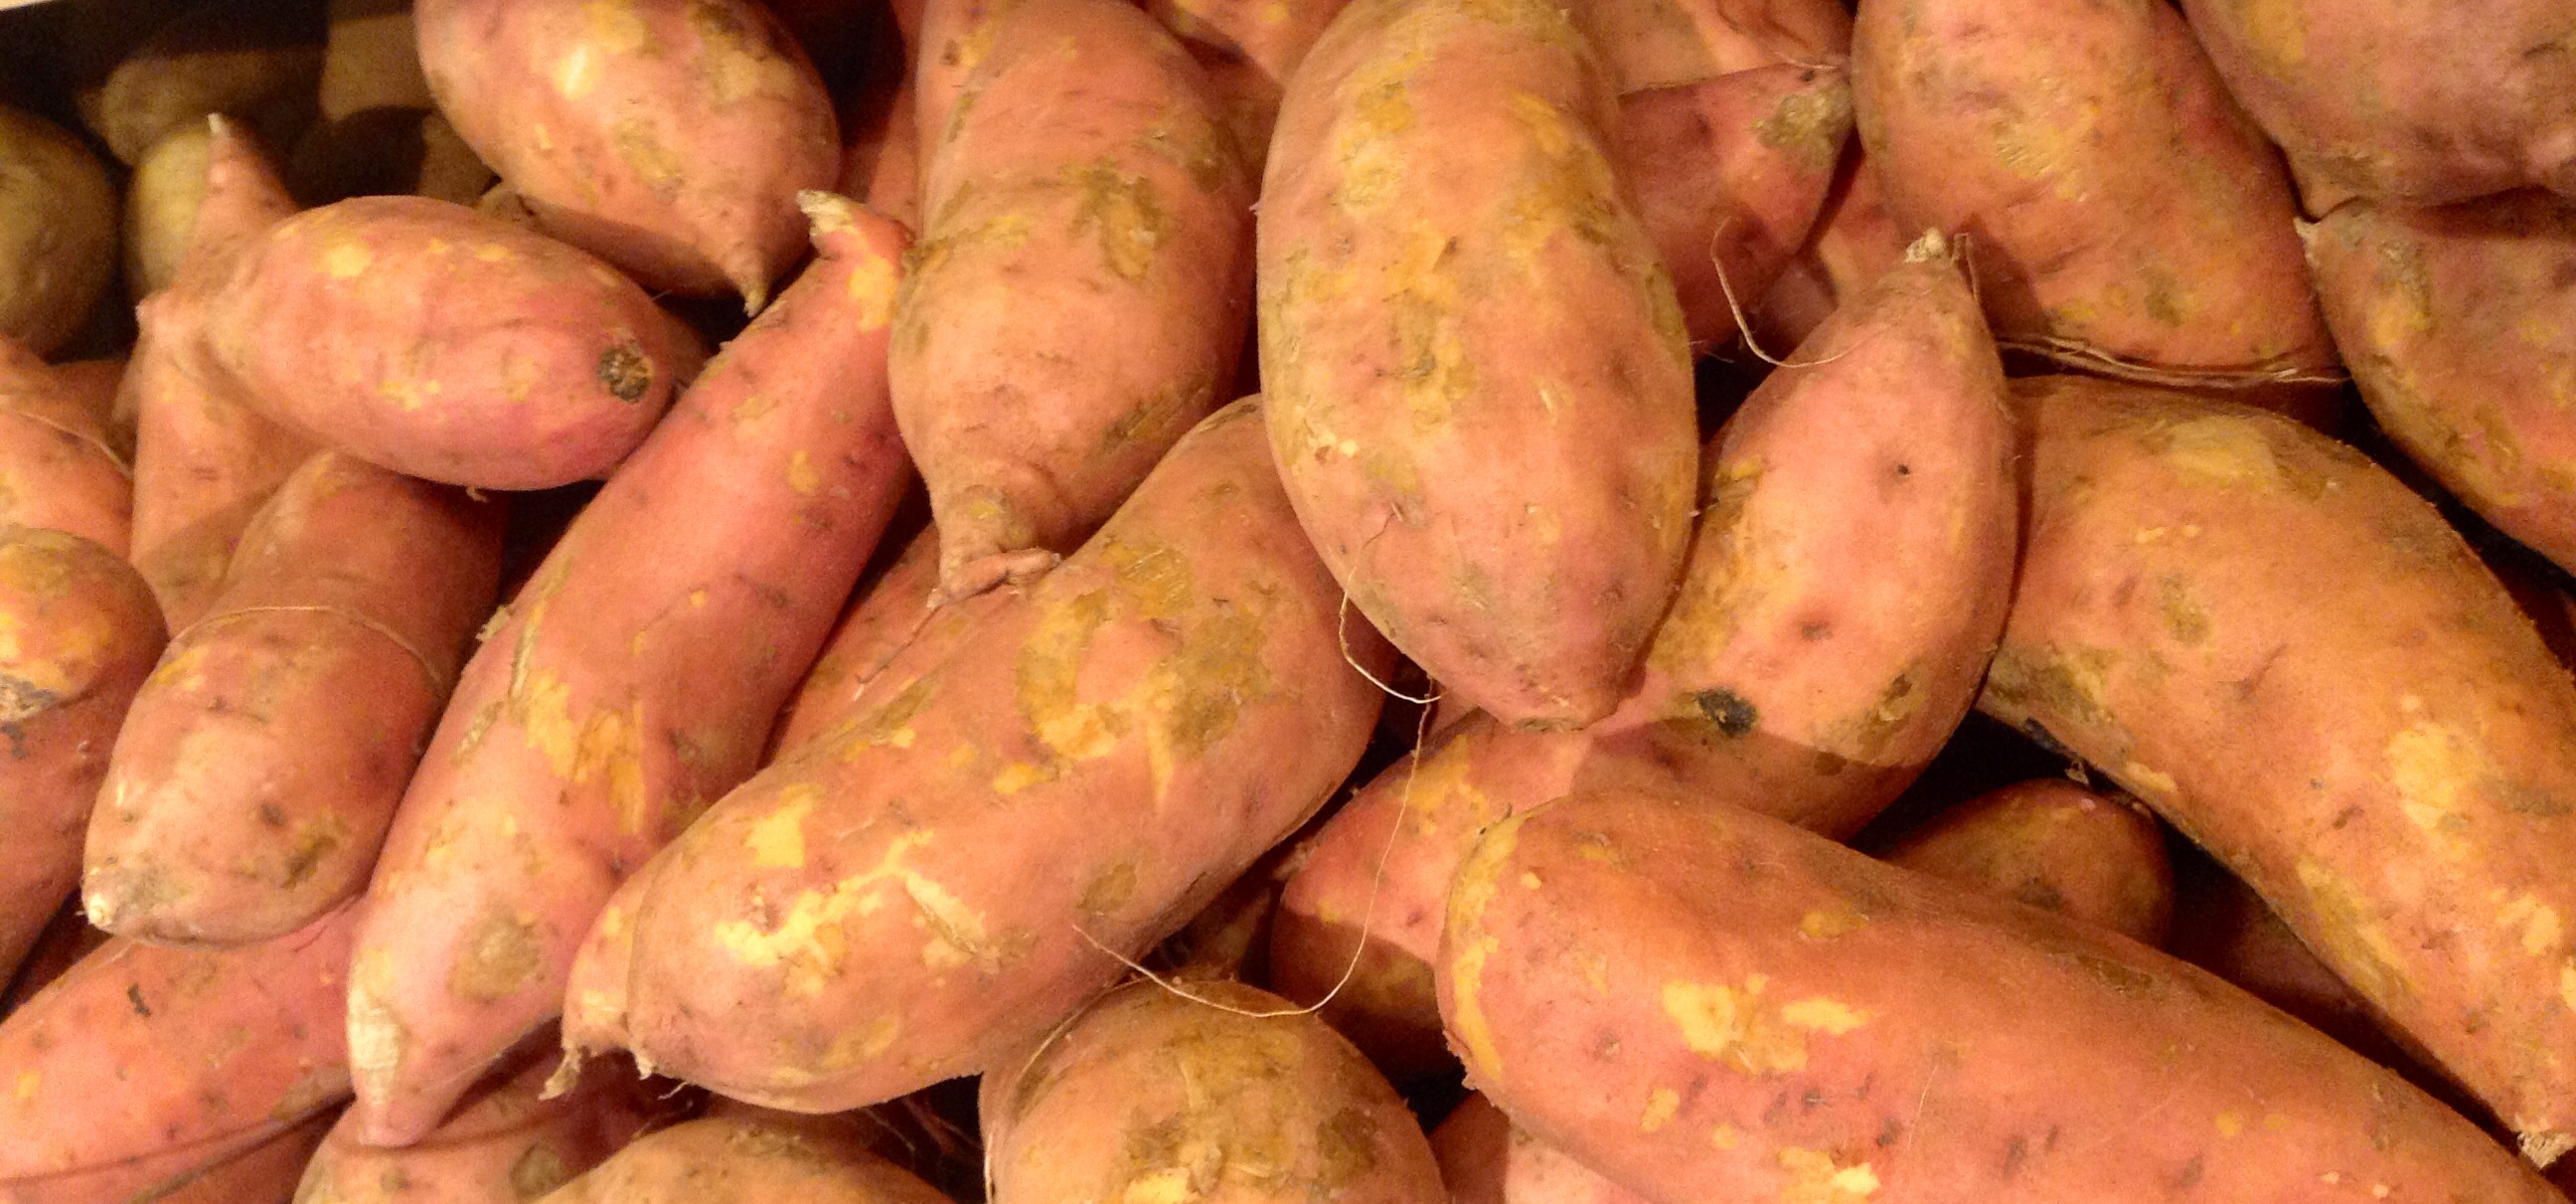 a pile of sweet potatoes sits piled high